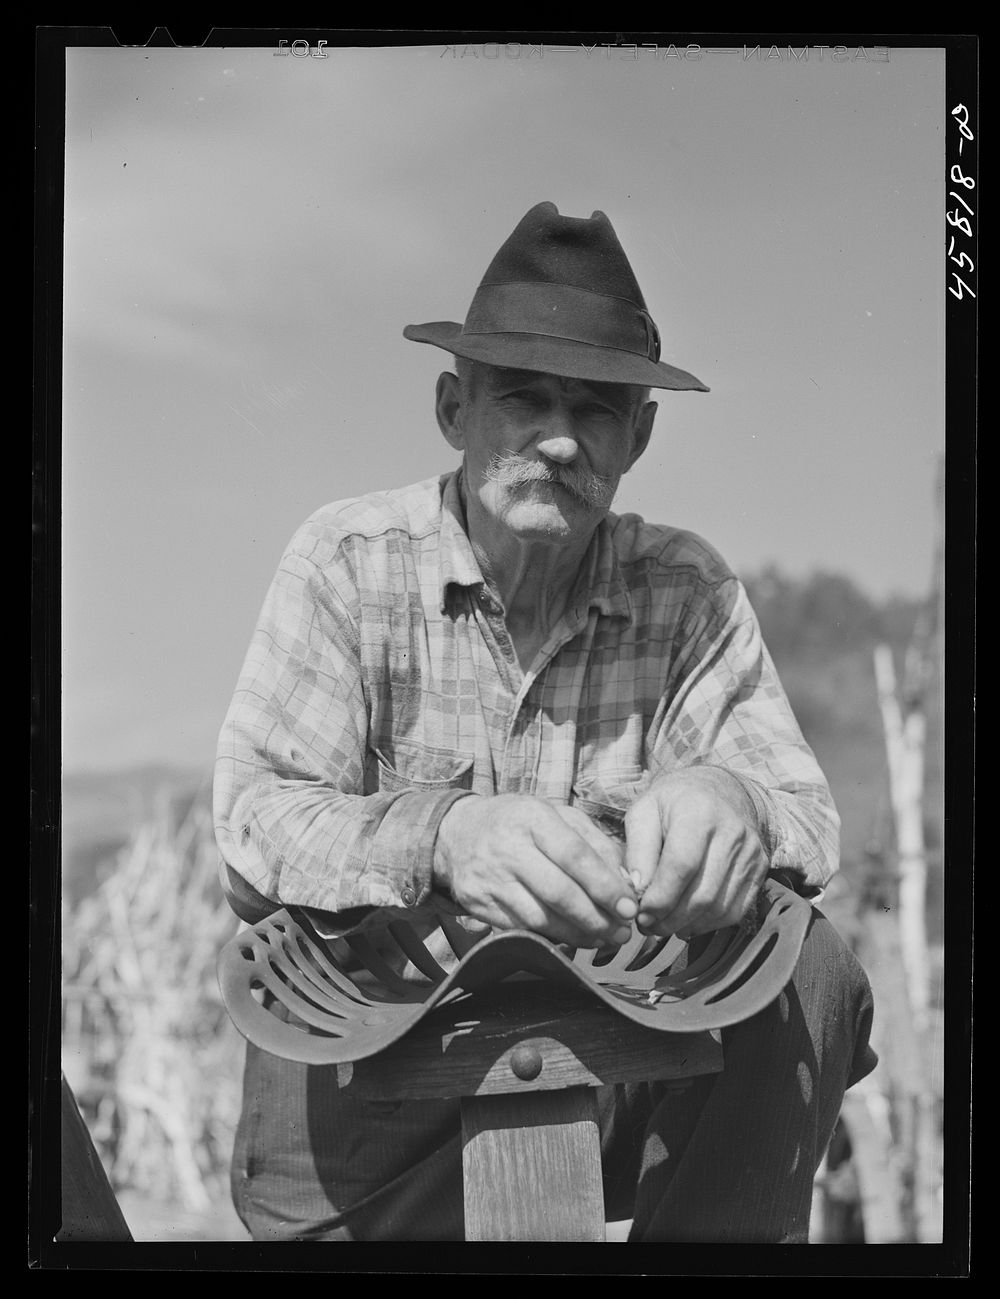 Farmer at the World's Fair at Tunbridge, Vermont. Sourced from the Library of Congress.